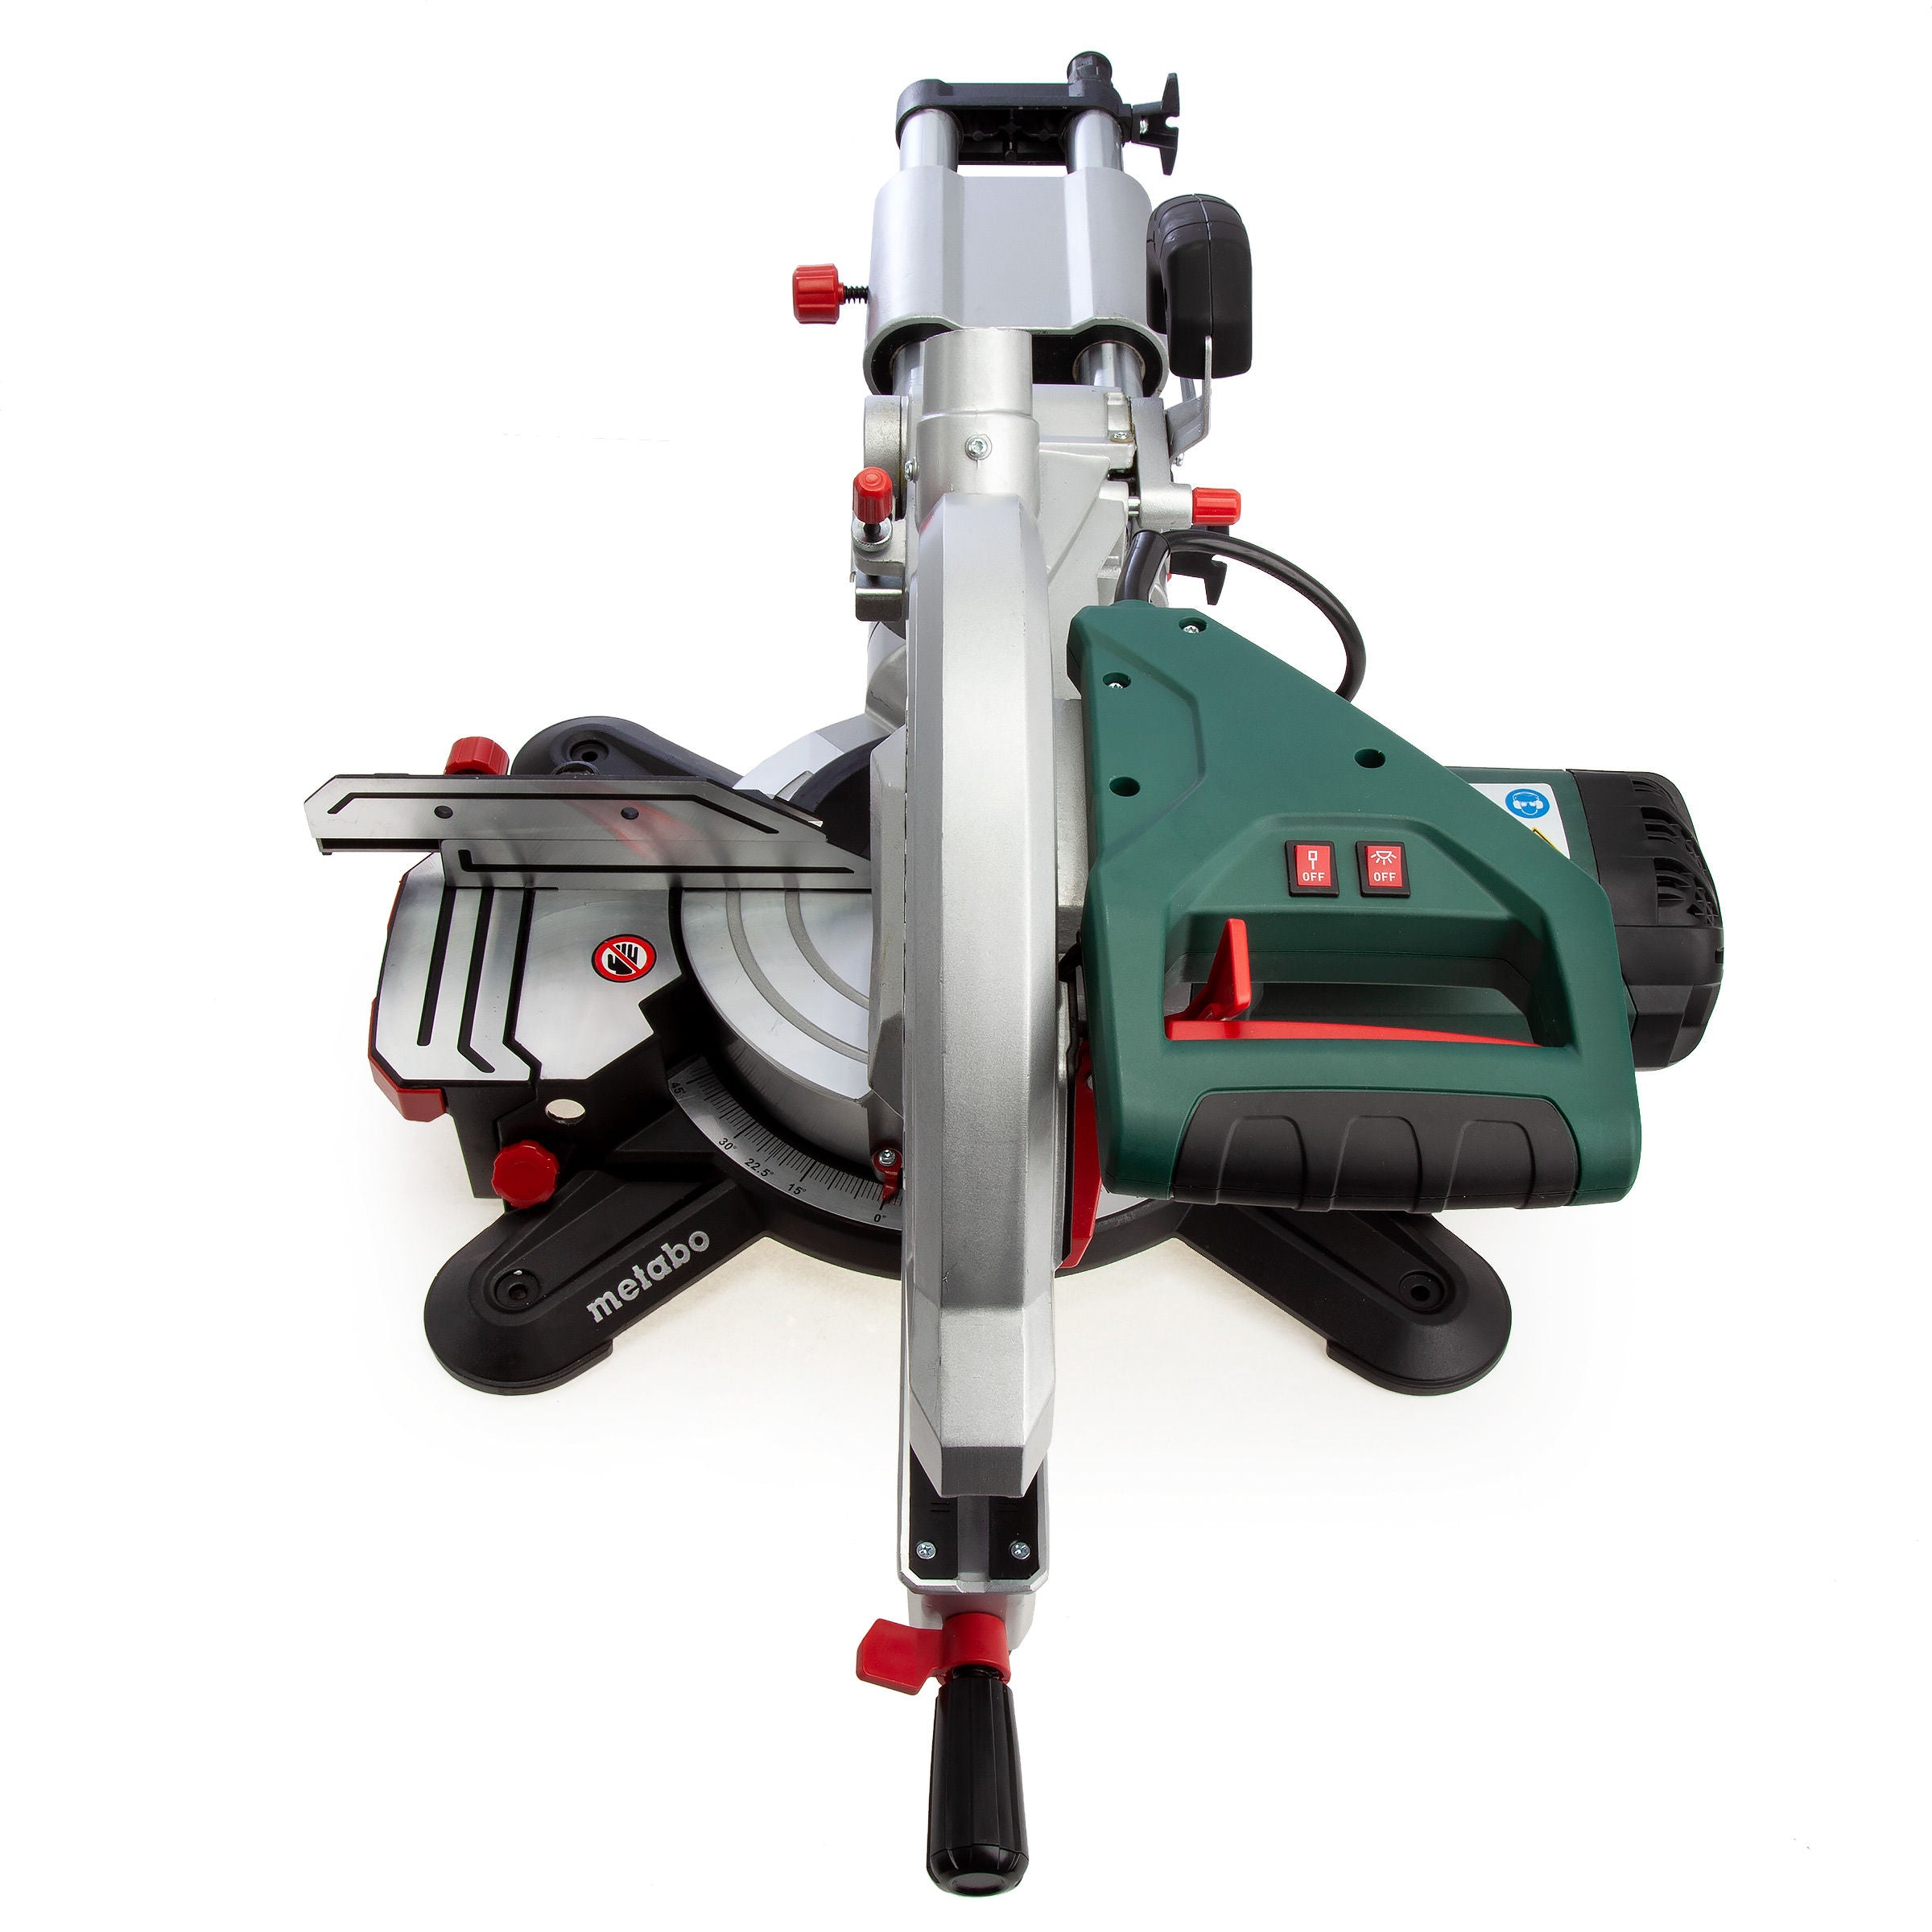 Metabo KGS305M 305mm Sliding Mitre Saw 240V with Universal Wheels Stand